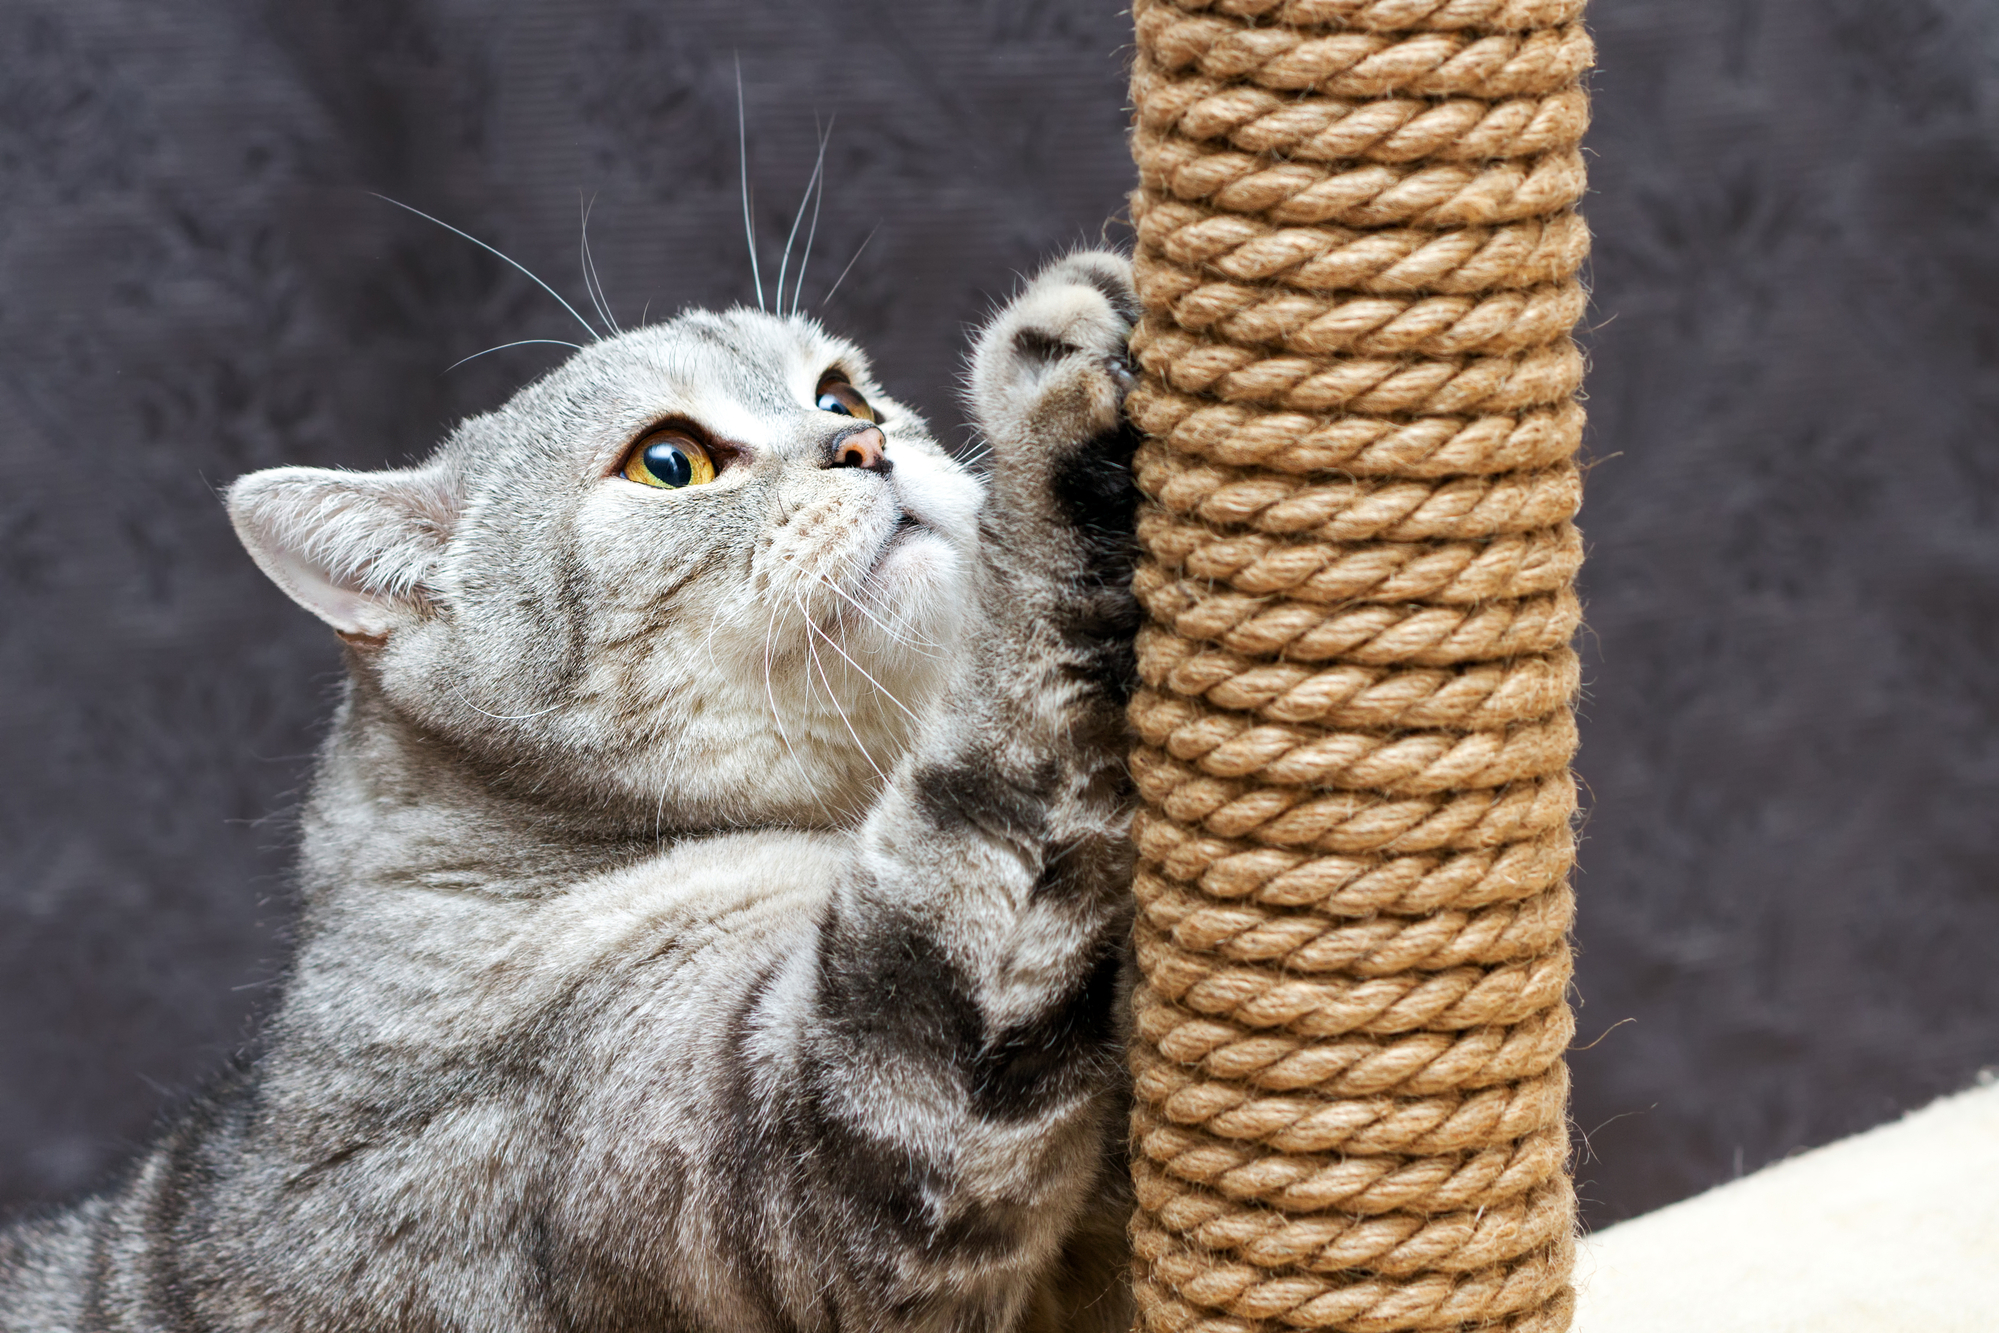 Cat scratching the rope